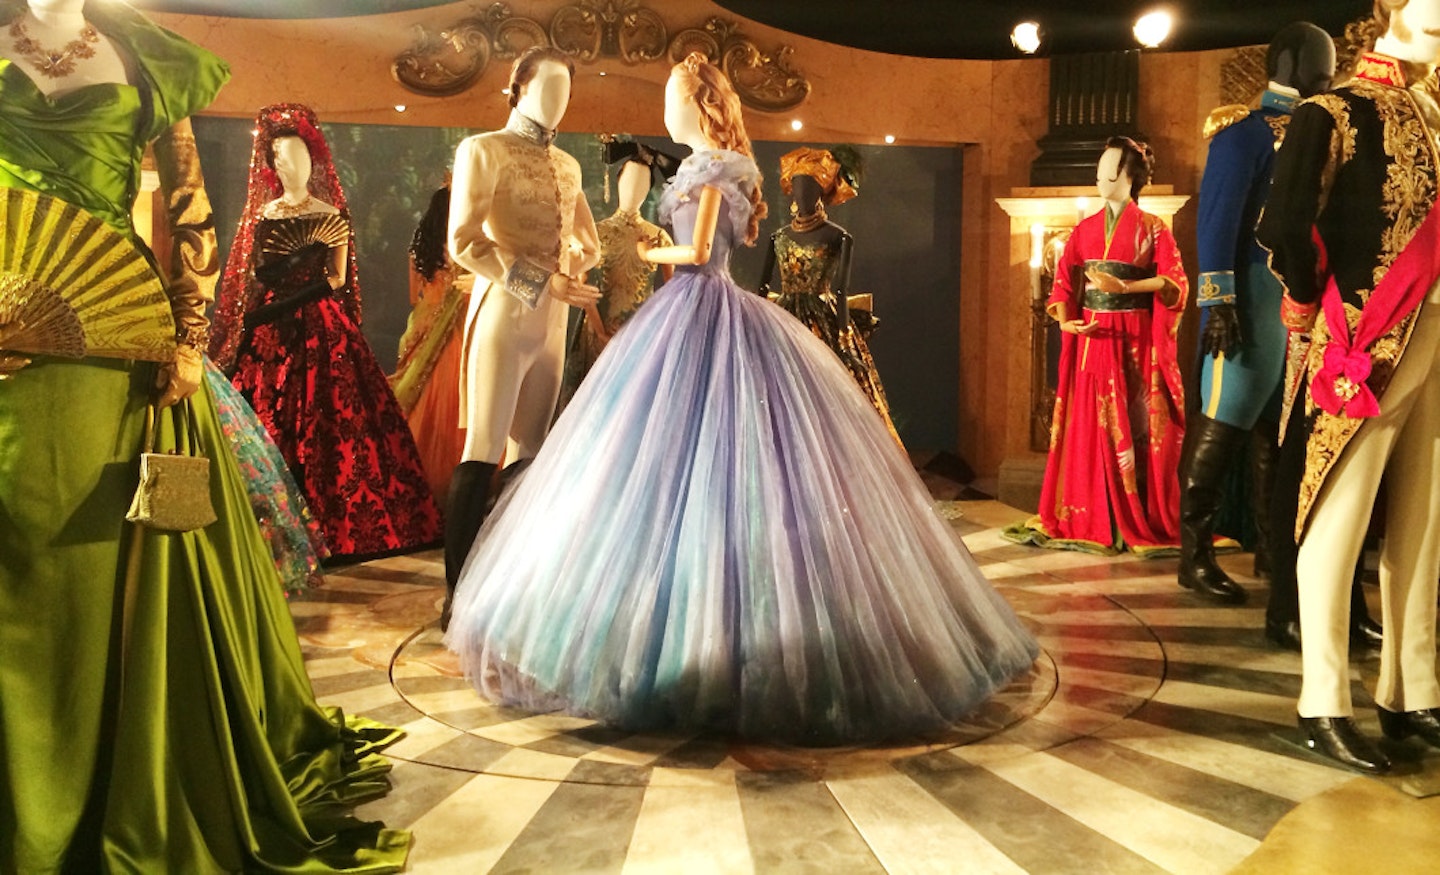 The costumes from the forthcoming Cinderella movie on display at the exhibition in Berlin